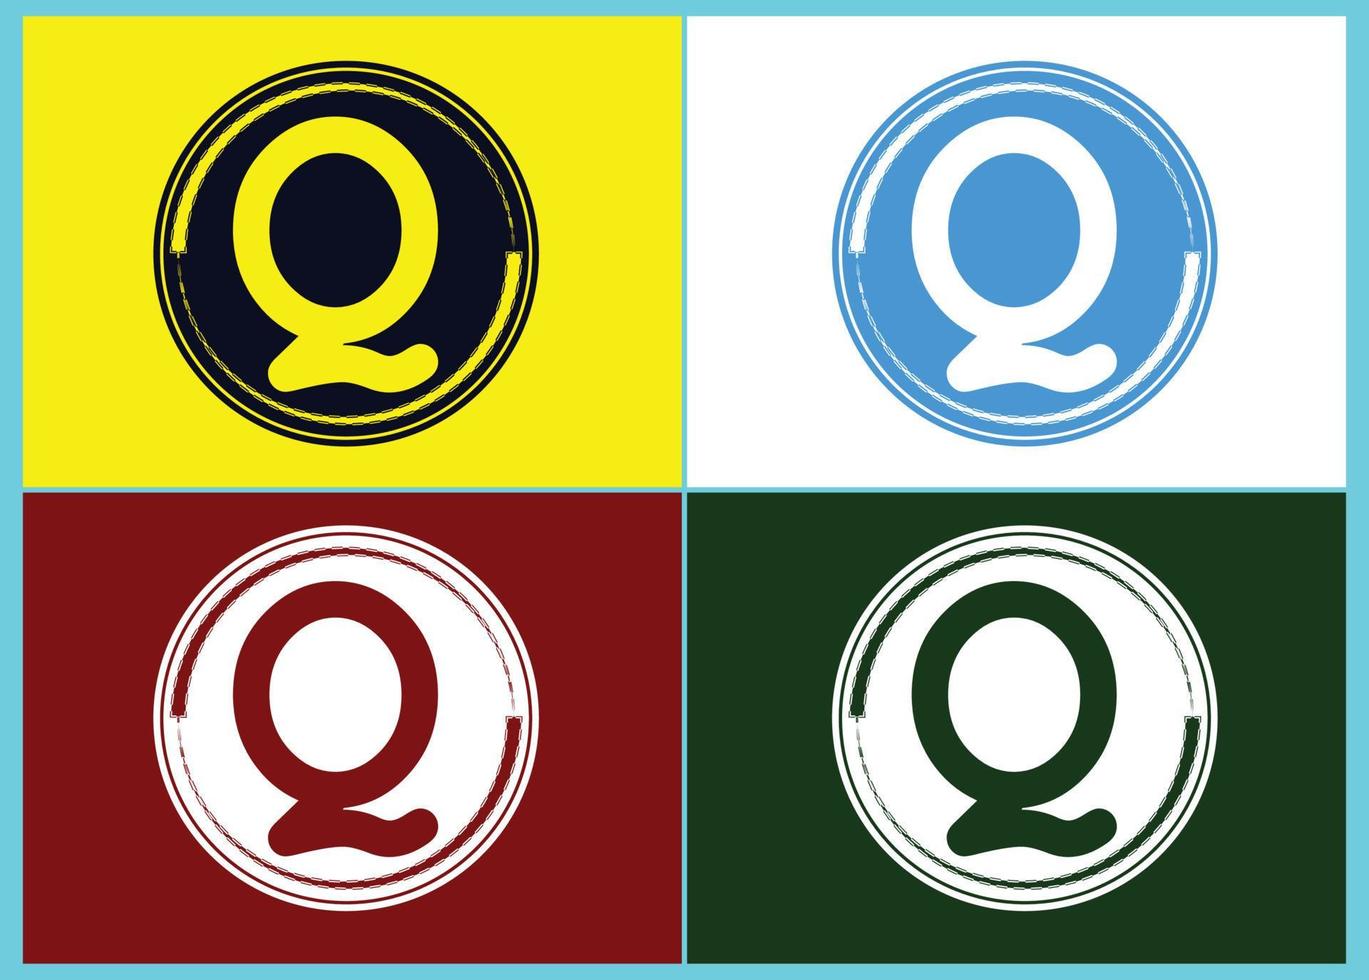 Q letter logo and icon design template vector